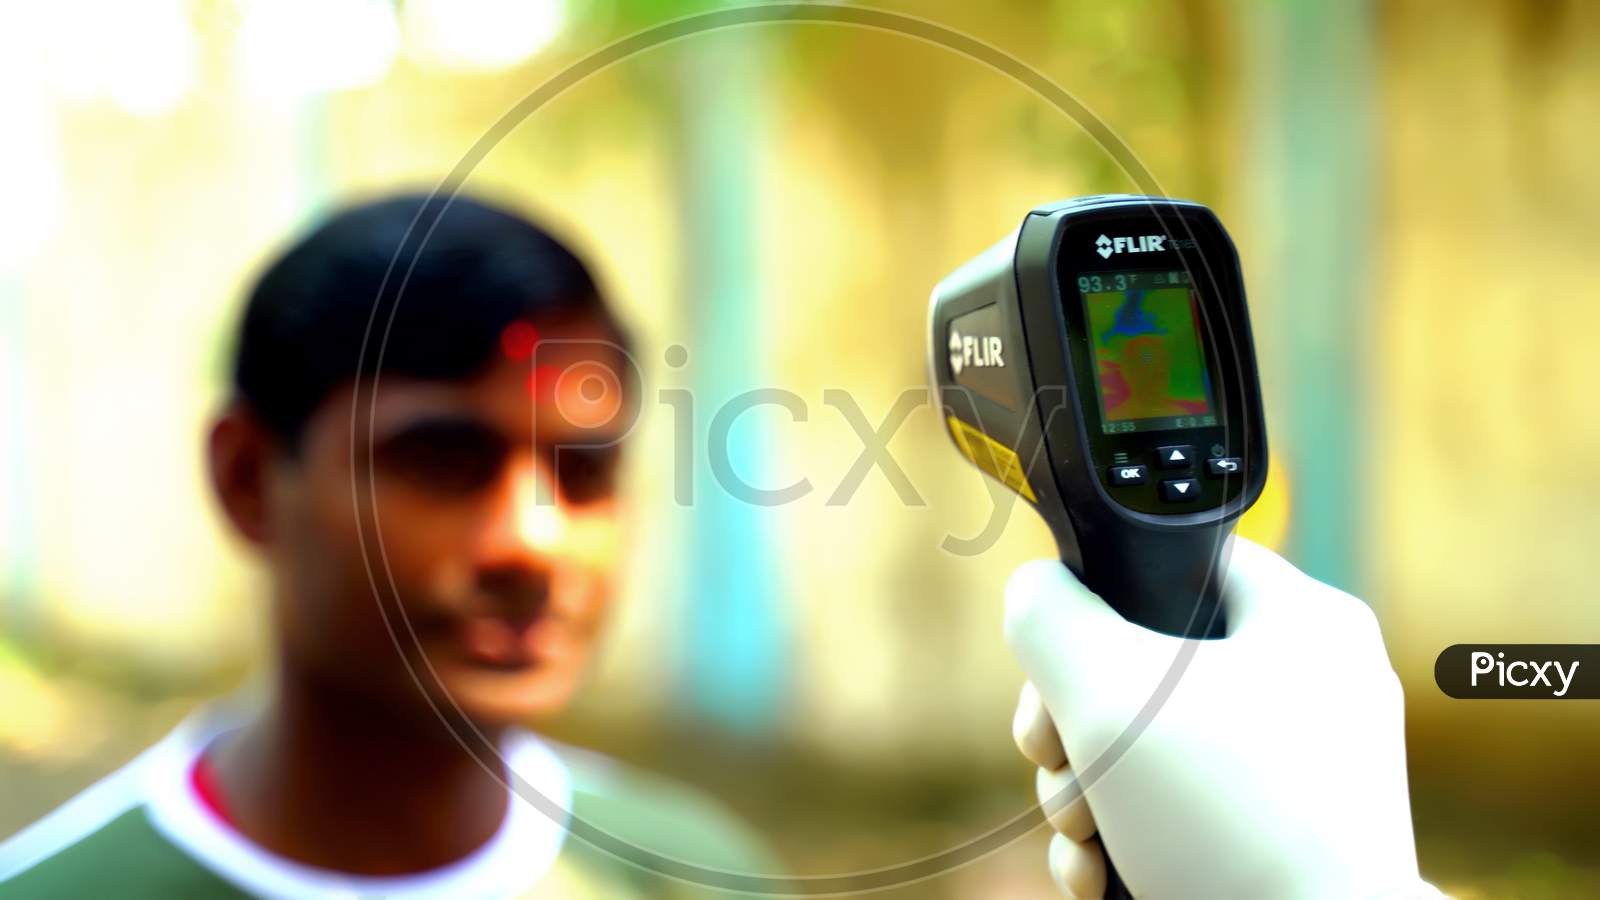 Ludhiana, Punjab / India - May 09 2020: Checking a man is temperature with an electronic thermometer. Thermometer in focus, face blurry in the background. Coronavirus, Covid-19 protection.